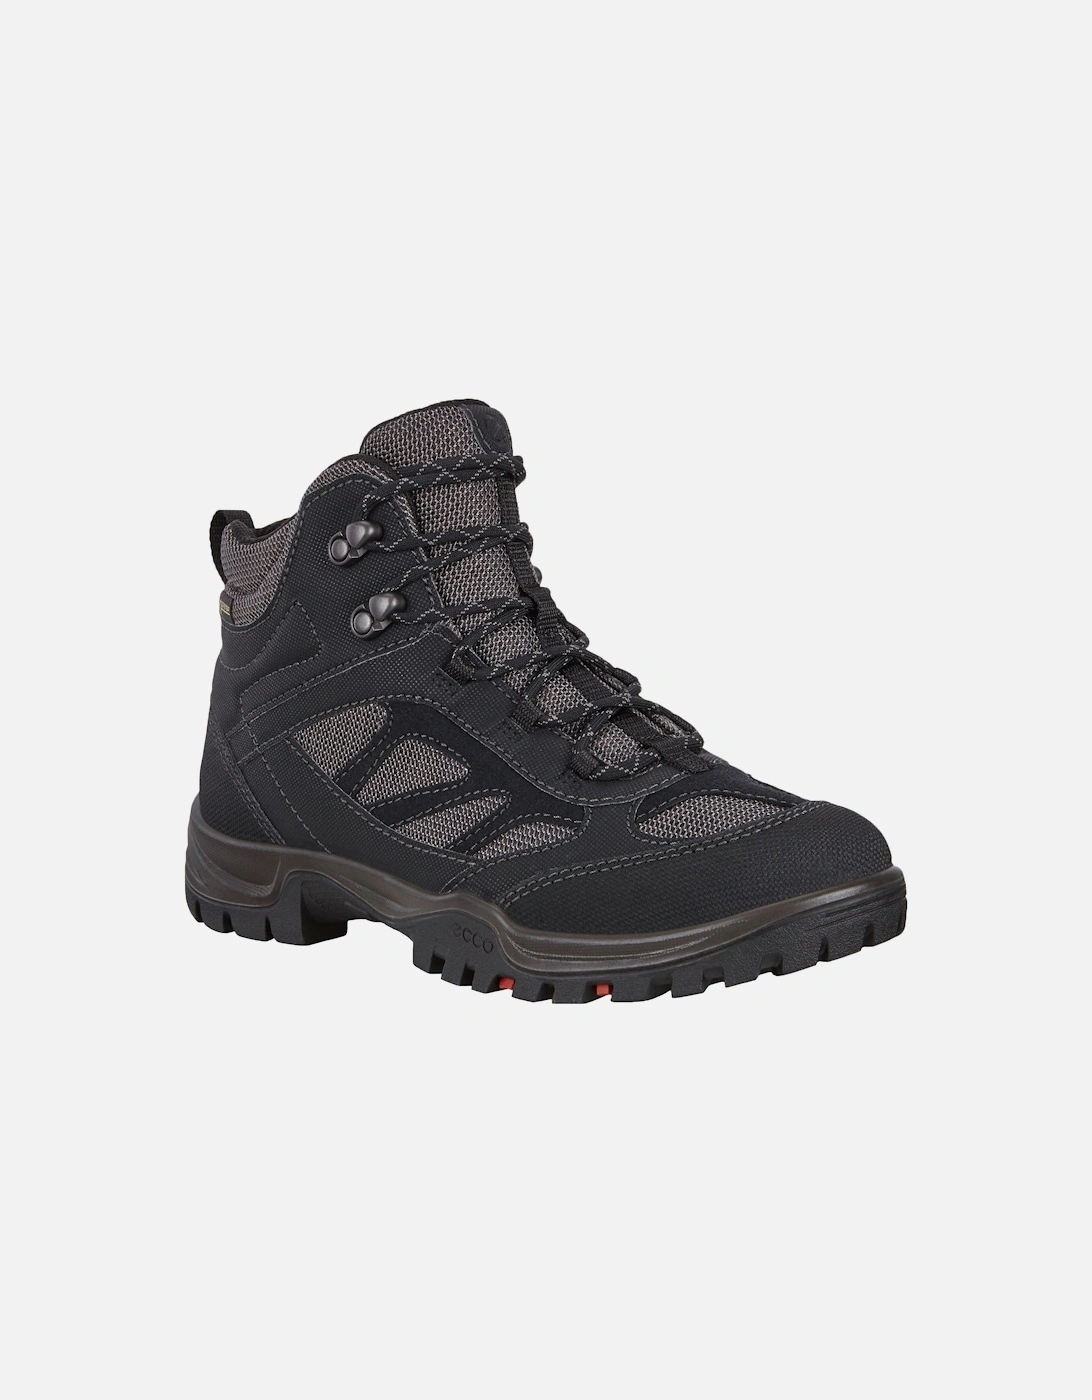 Womens XPEDITION III High GORE-TEX Waterproof Walking Boots - Black, 5 of 4